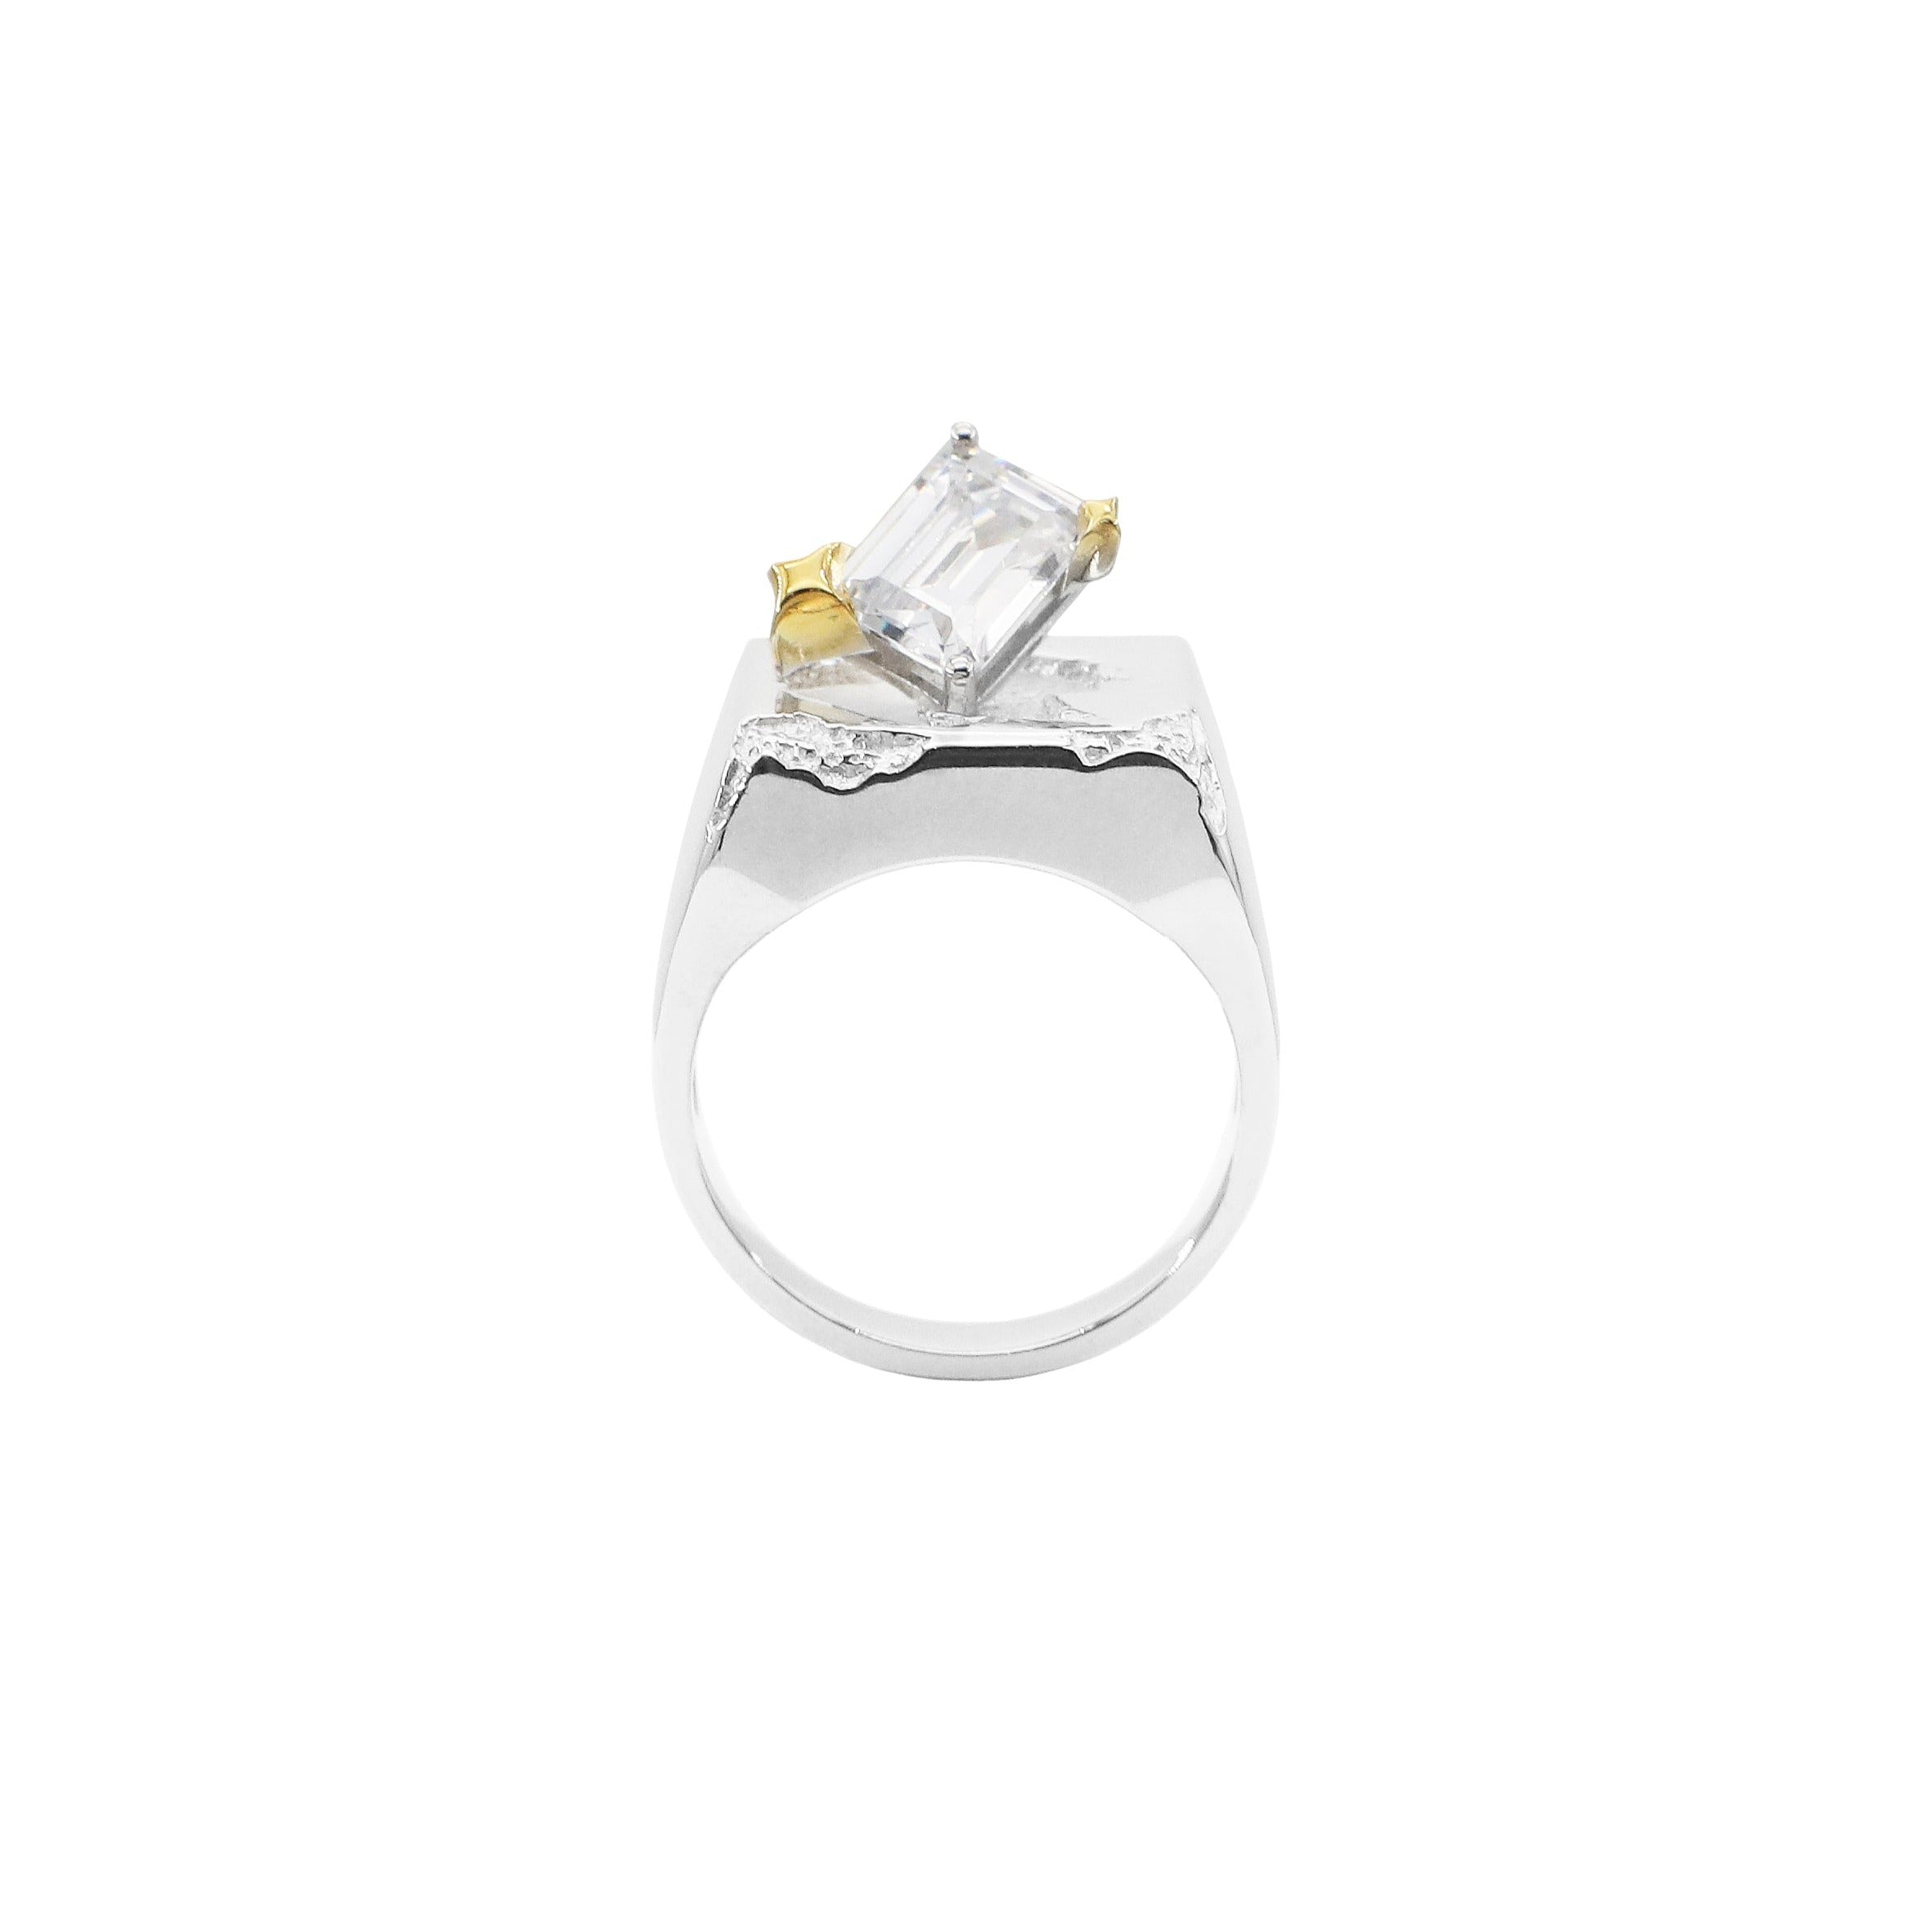 'NO. 2020' Cube Ring - A-D-JUST - ALSOLIKE